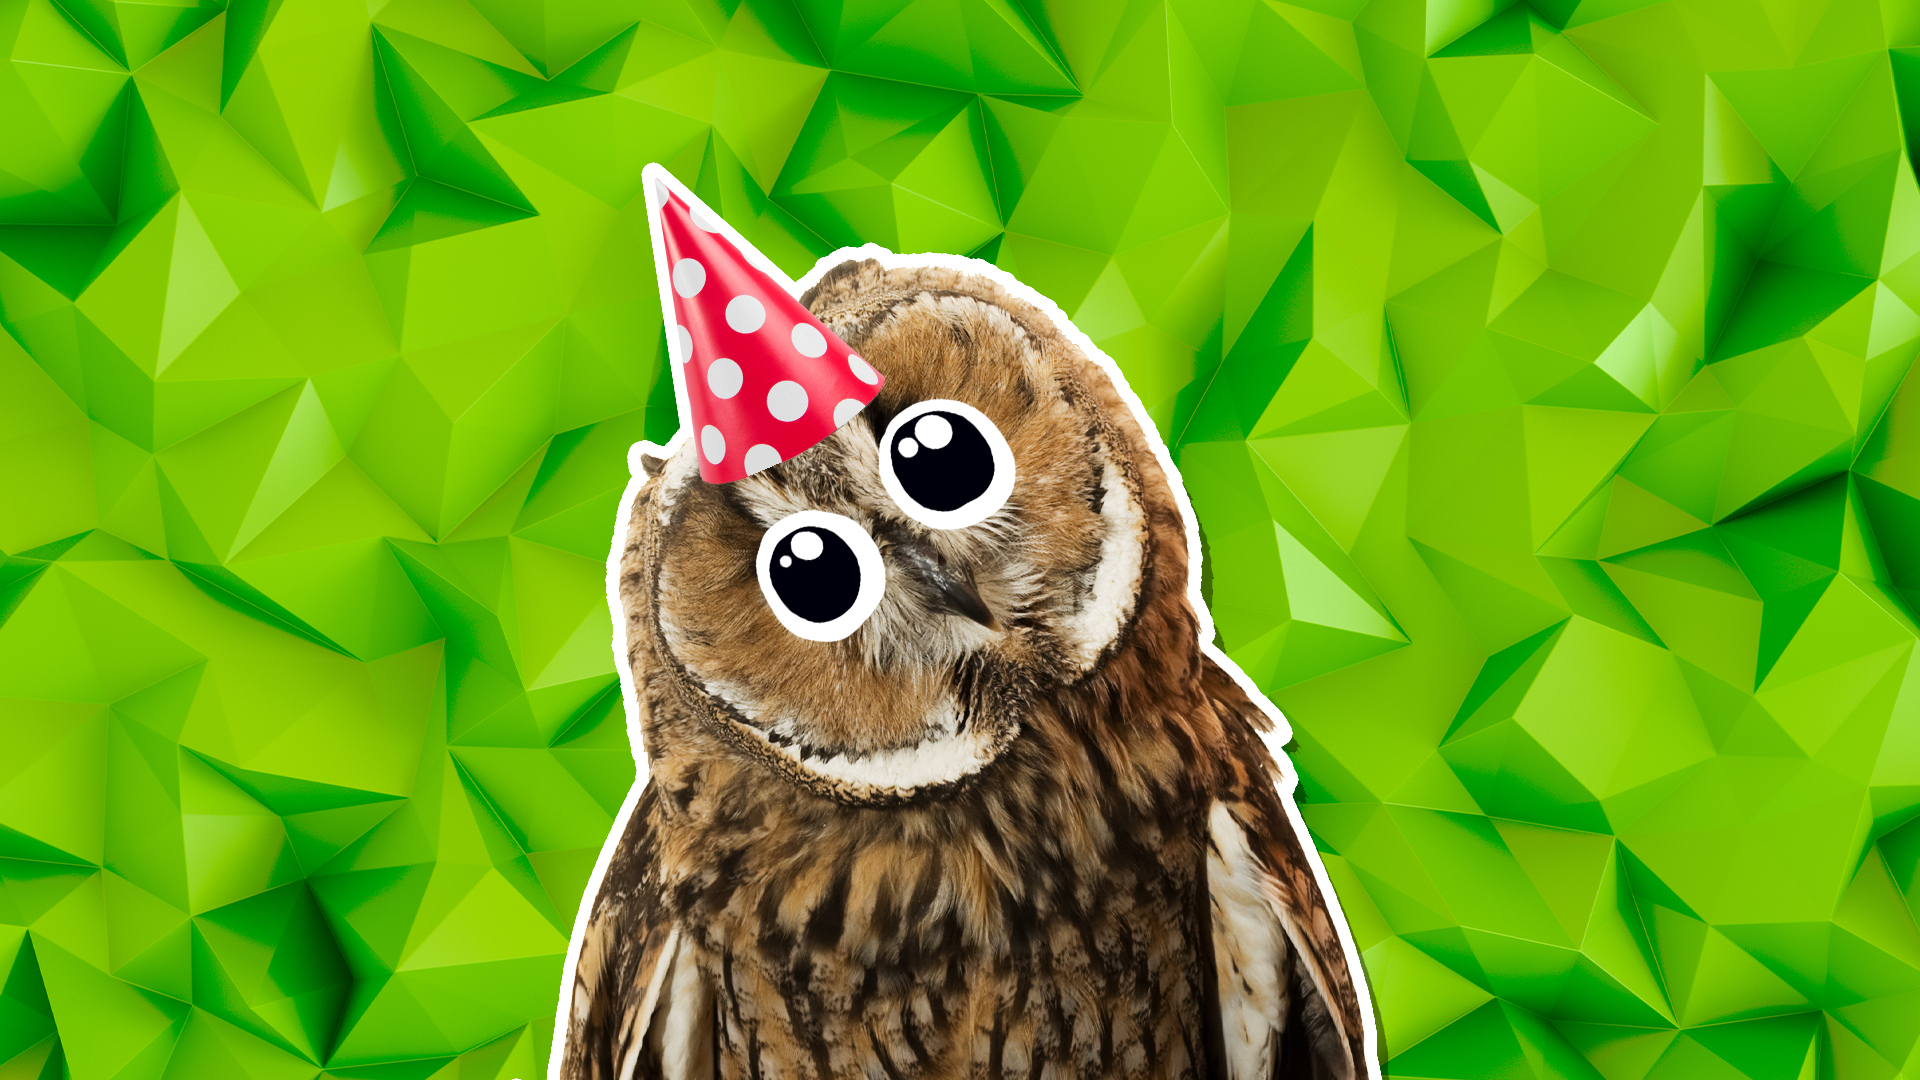 An owl in a party hat